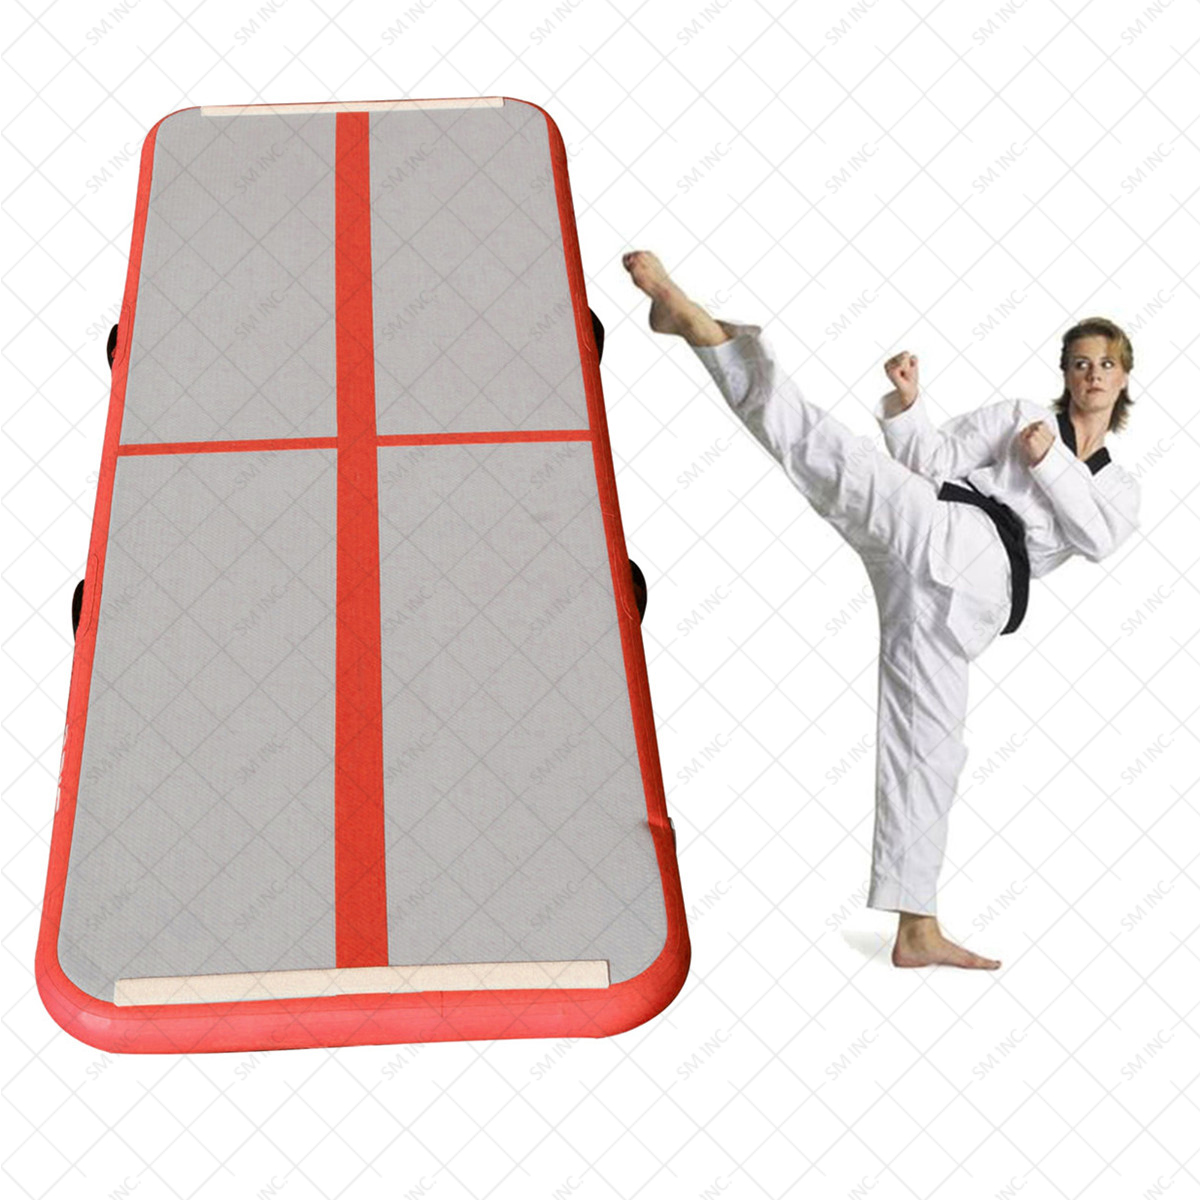 IPRee® Gym Air Track Floor Pad Home Gymnastics Tumbling Inflatable Rolling Mat